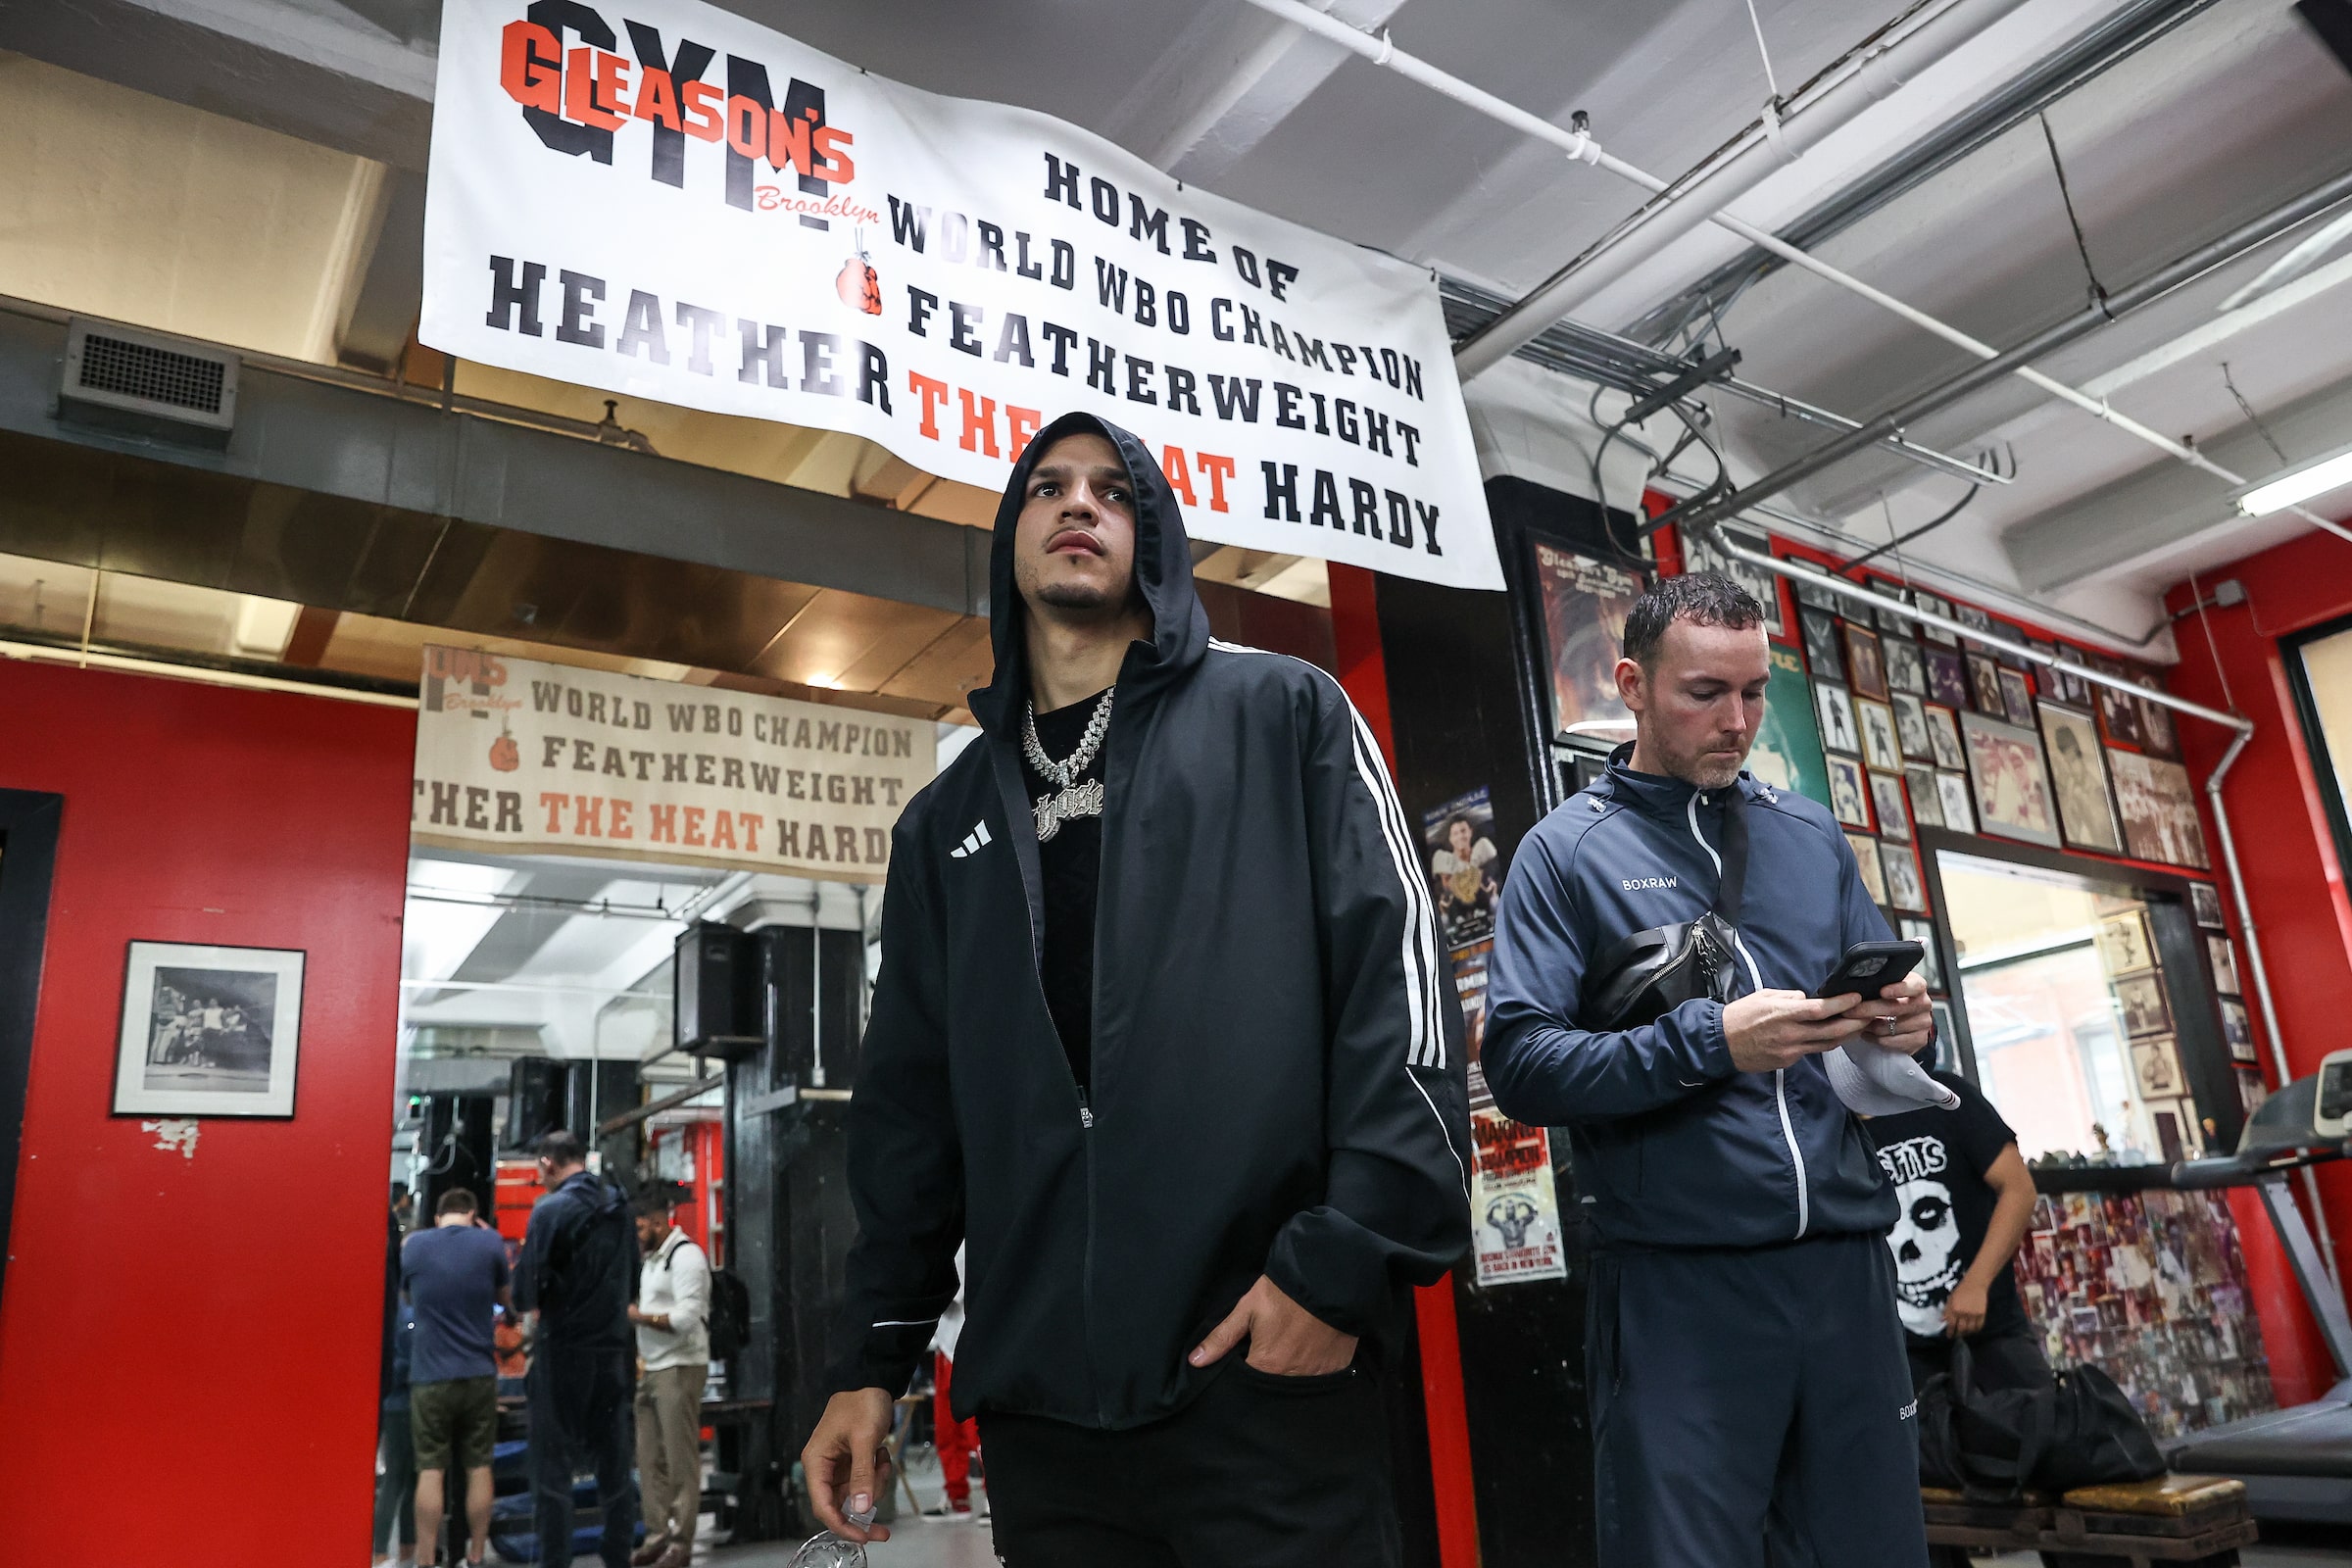 Berlanga hopes to emulate Puerto Rican heroes Trinidad and Cotto in the Garden